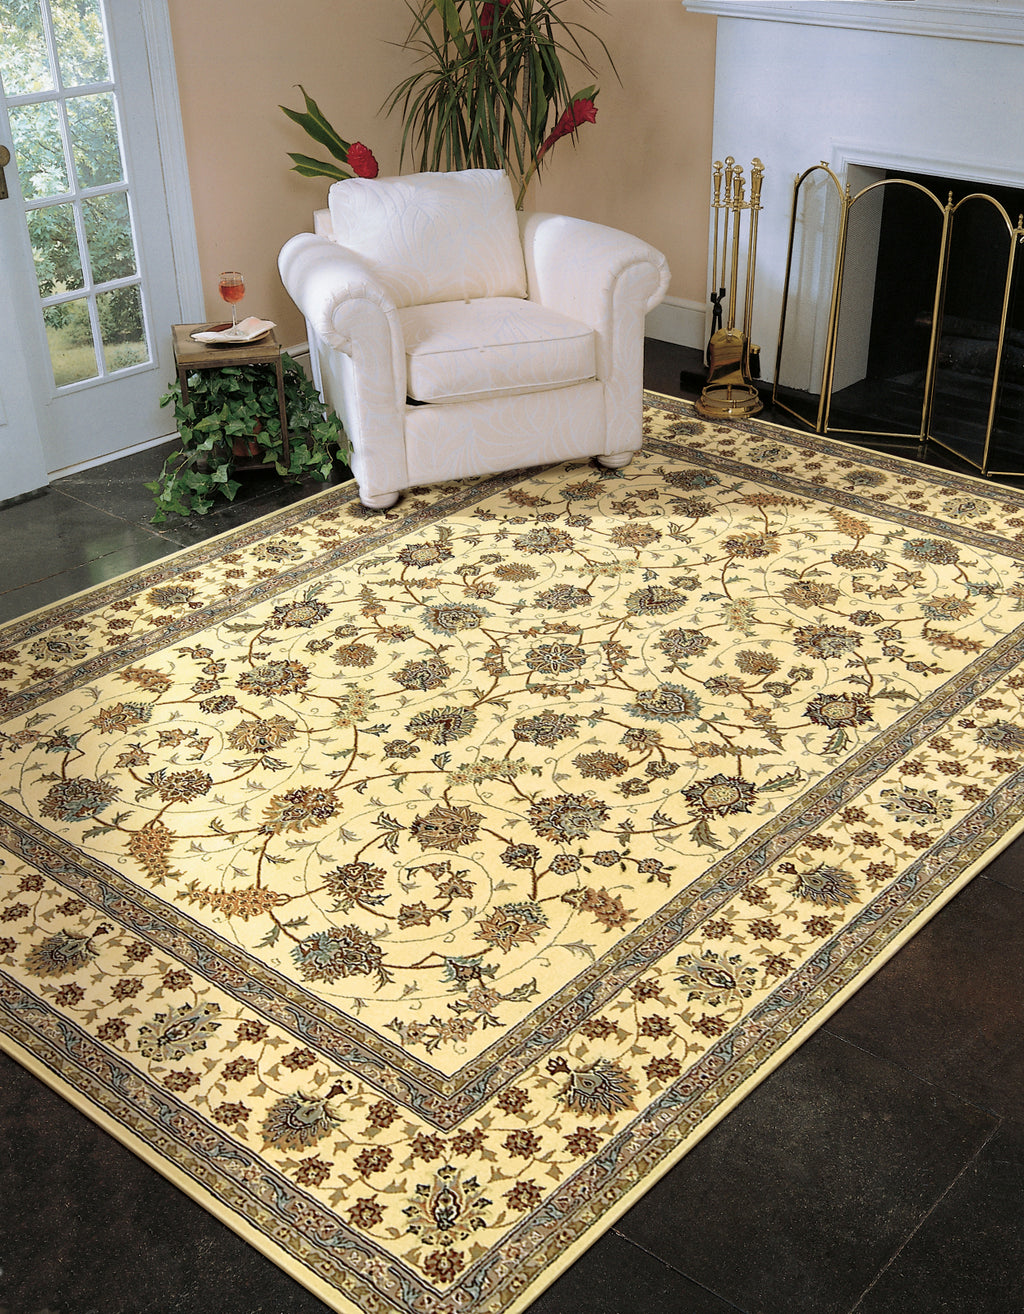 Nourison 2000 2023 Ivory Area Rug 8' X 10' Living Space Shot Feature